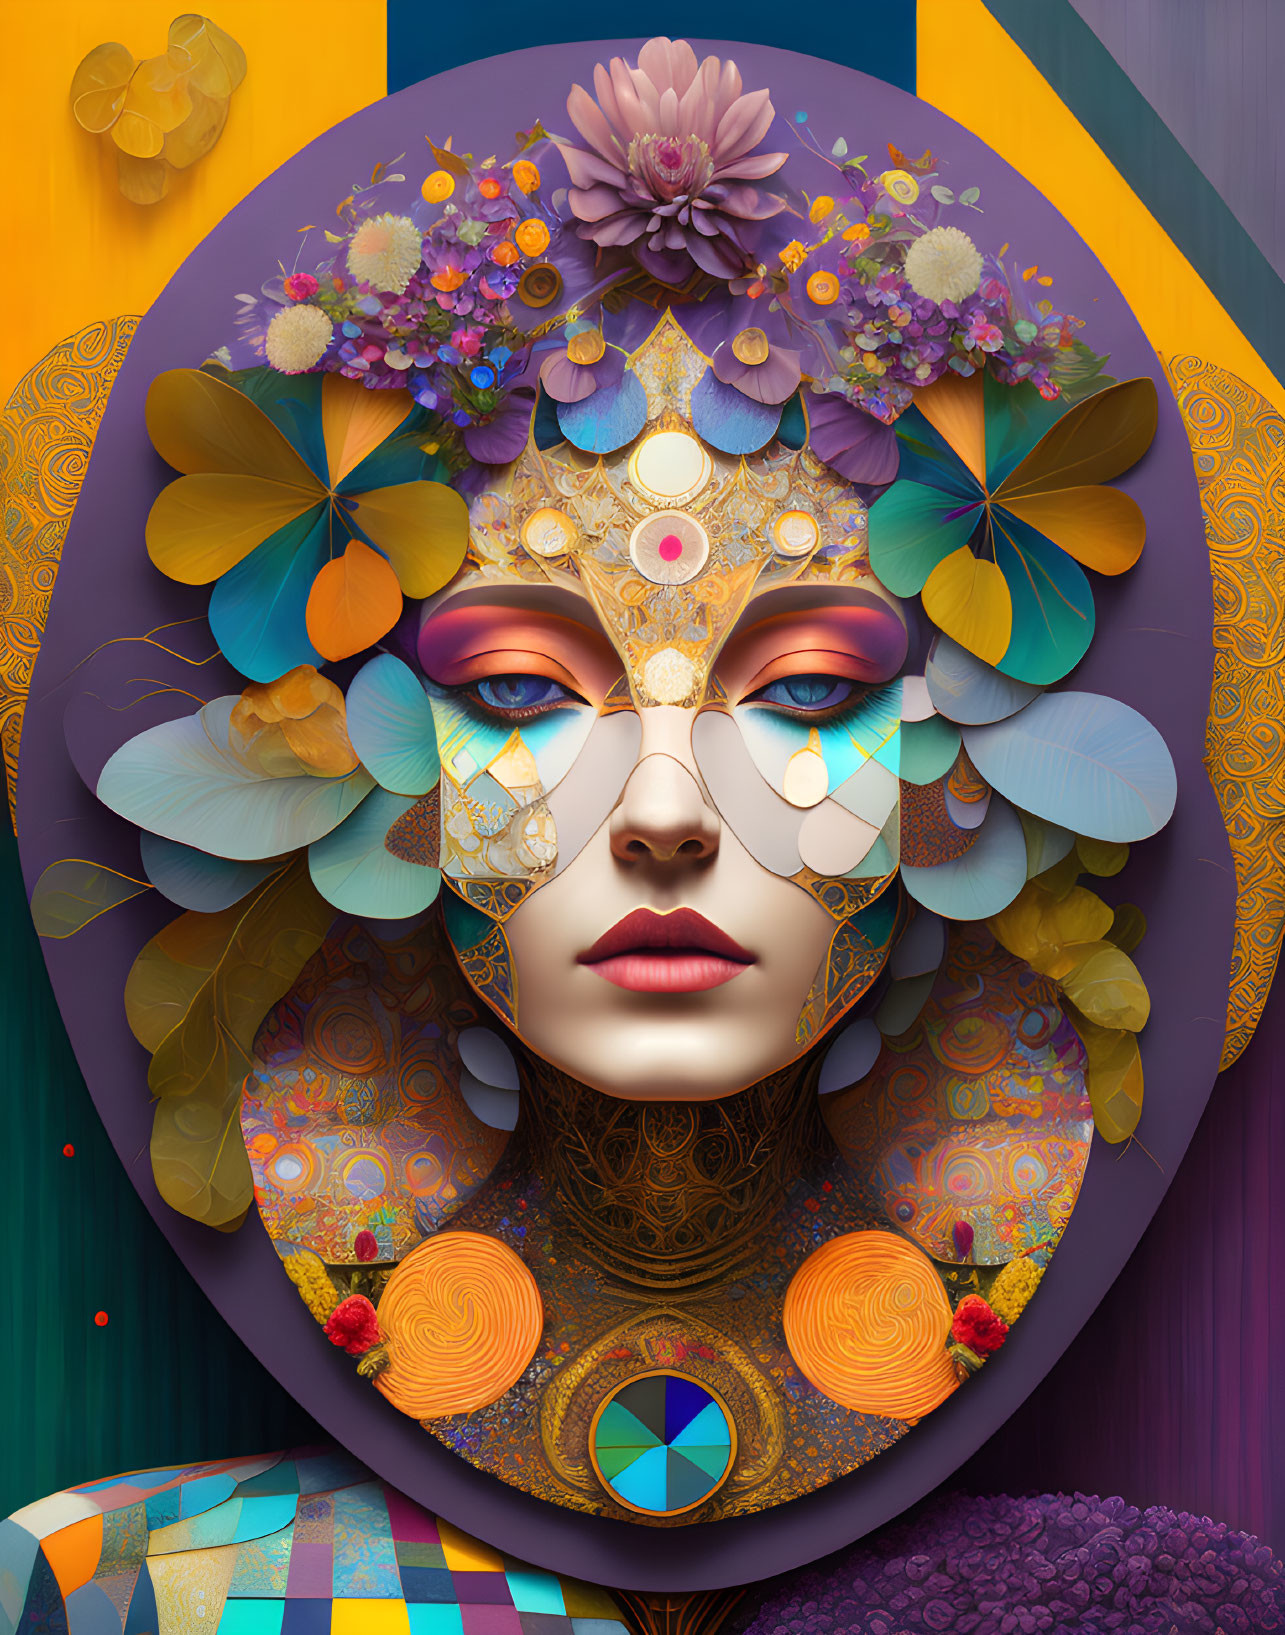 Colorful Geometric Background with Stylized Female Face